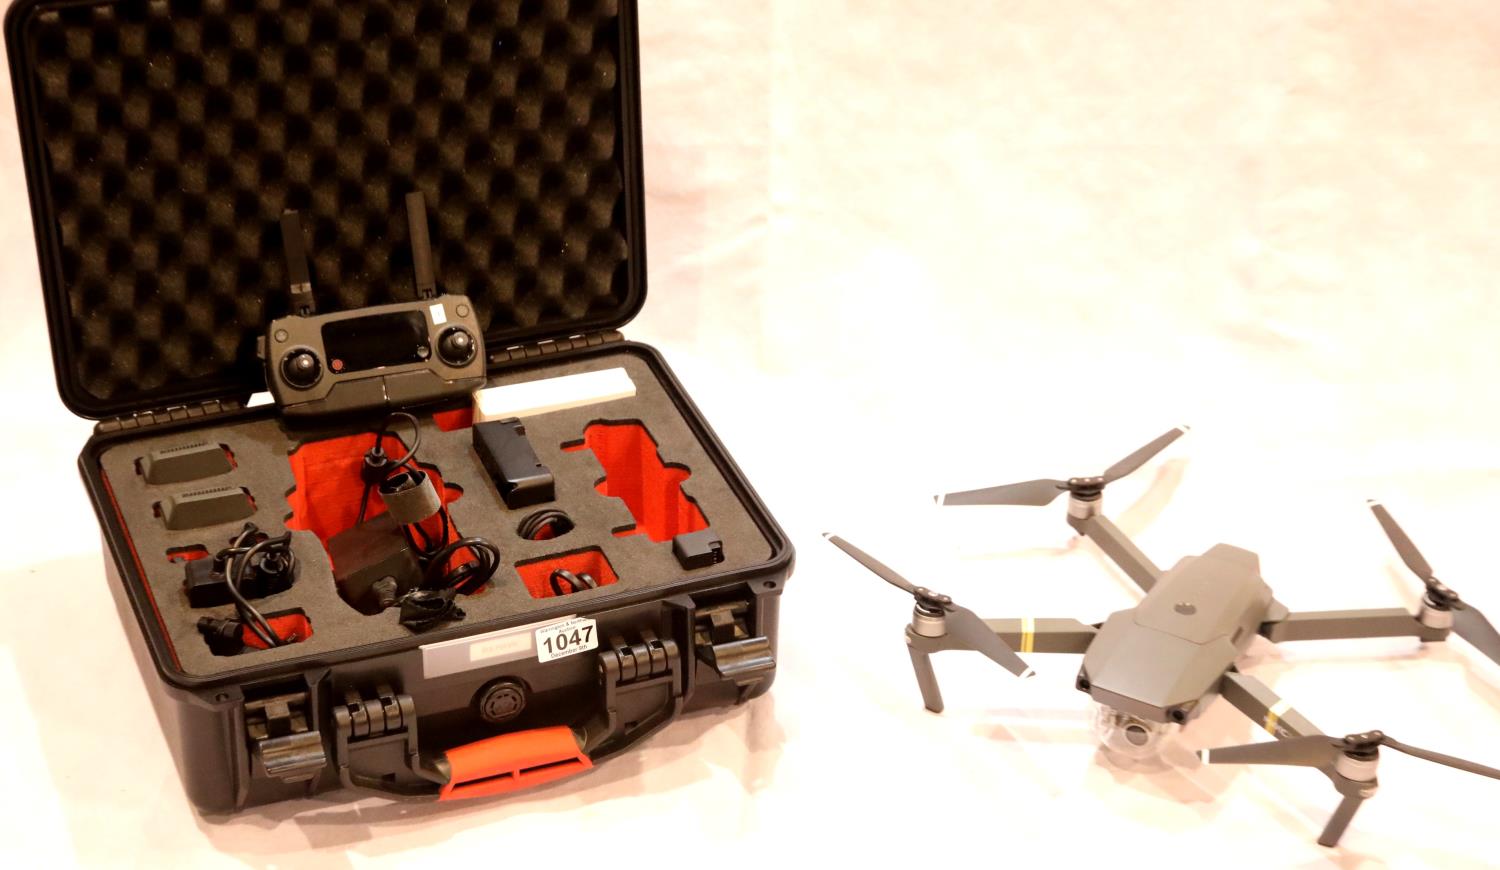 dji Mavic Pro drone with GL200A Master controller, 2x batteries and 2x chargers in a fitted HPRC